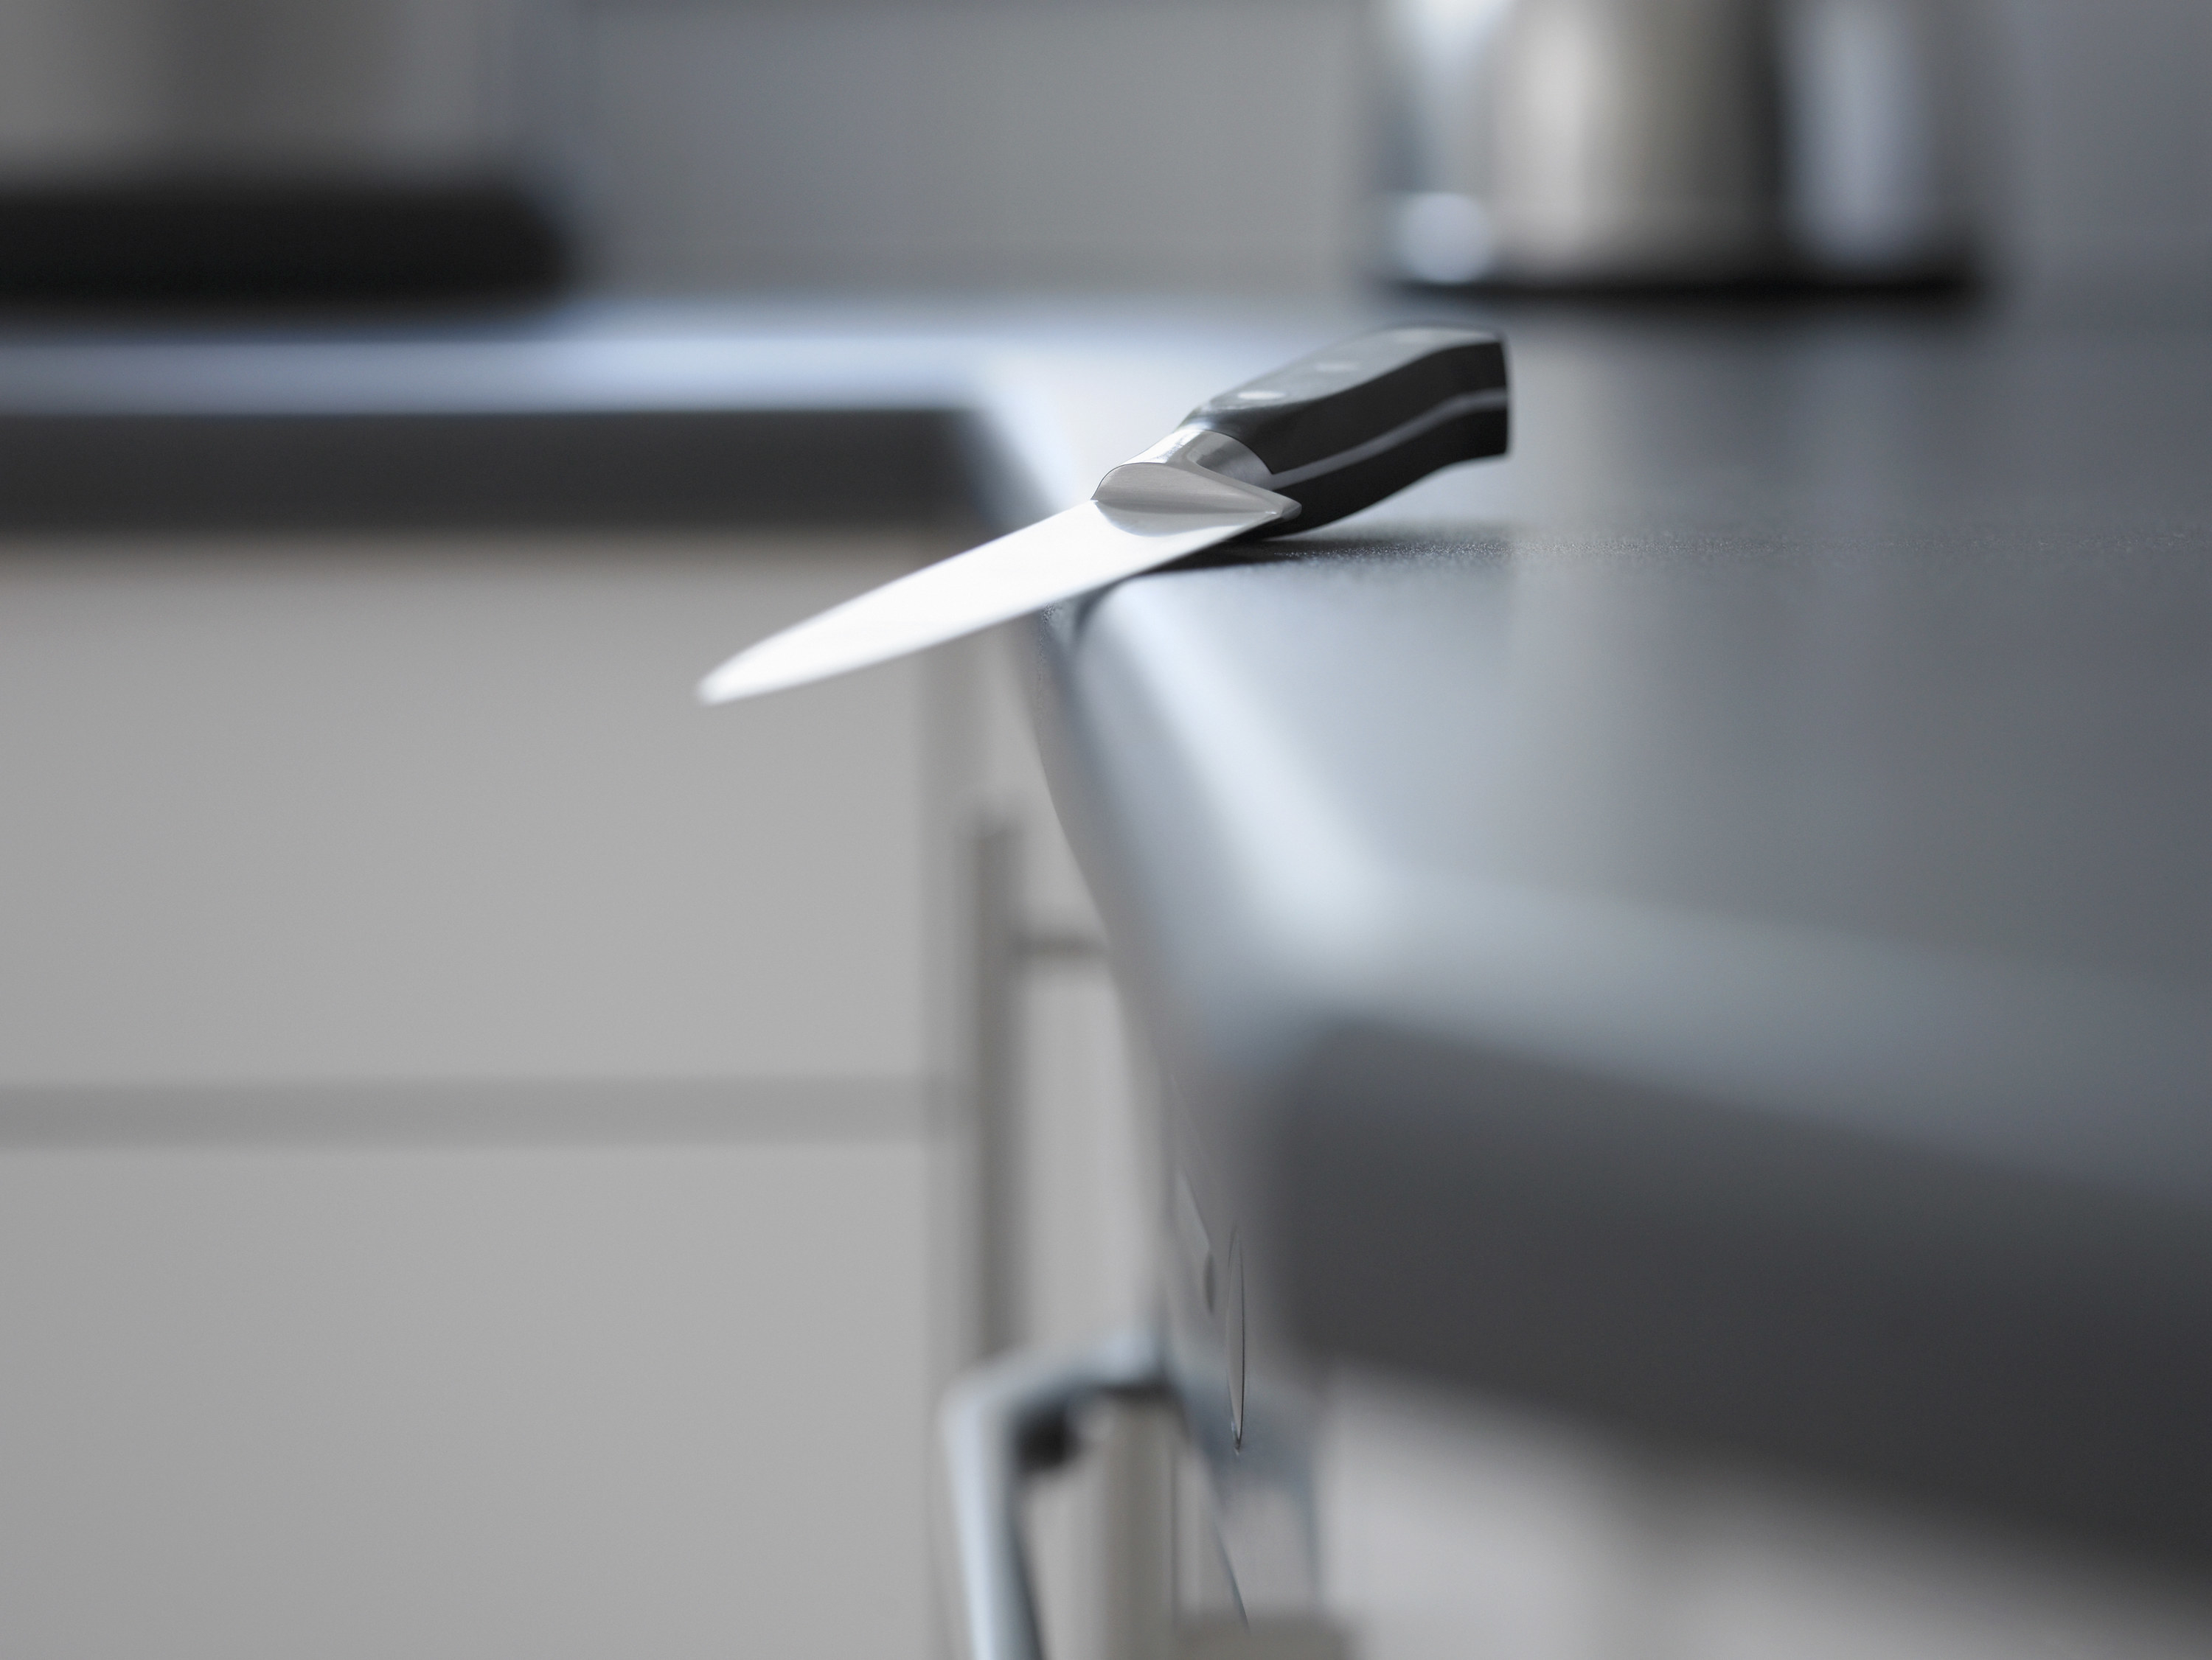 a knife on the edge of a counter